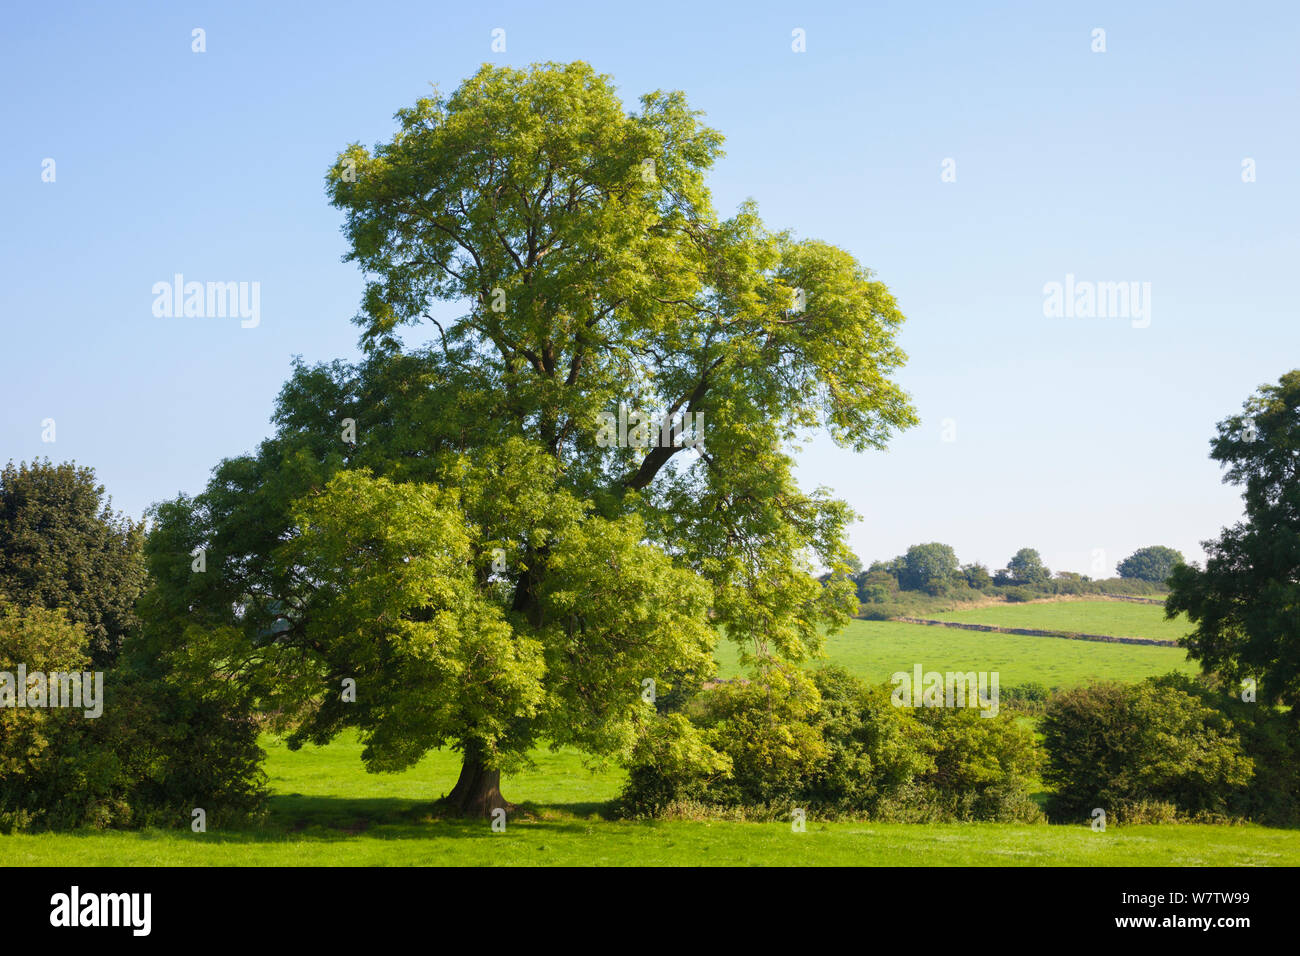 Ash Tree (Fraxinus excelsior) growing in a field. Peak DIstrict National Park, Derbyshire, UK. August. Stock Photo